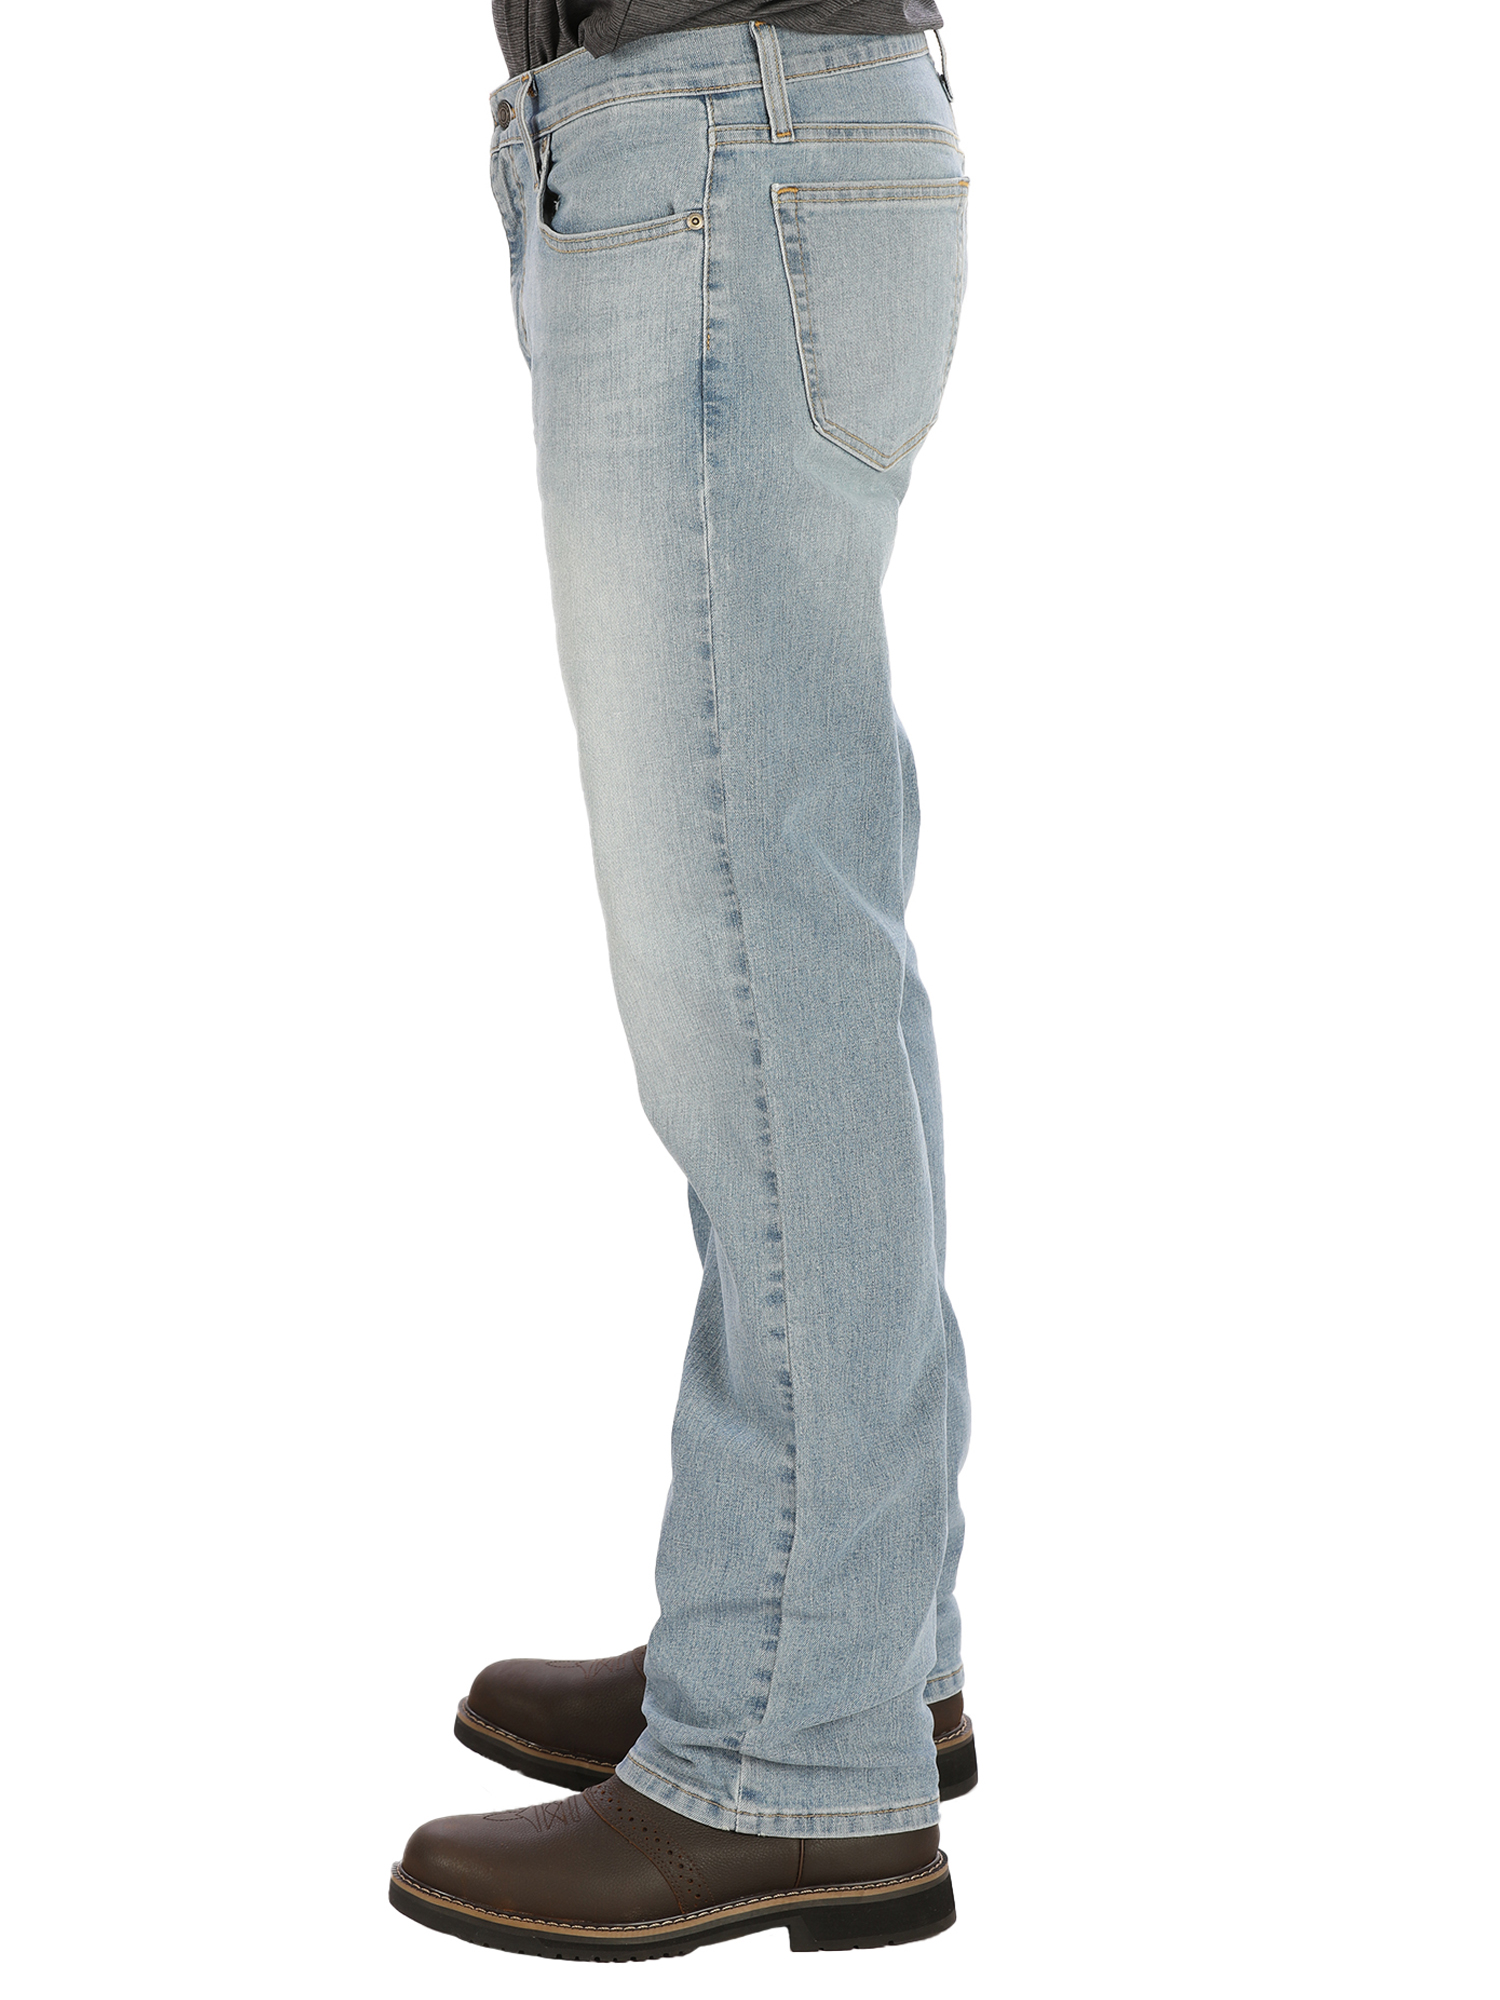 George Men's Bootcut Jeans - image 5 of 5